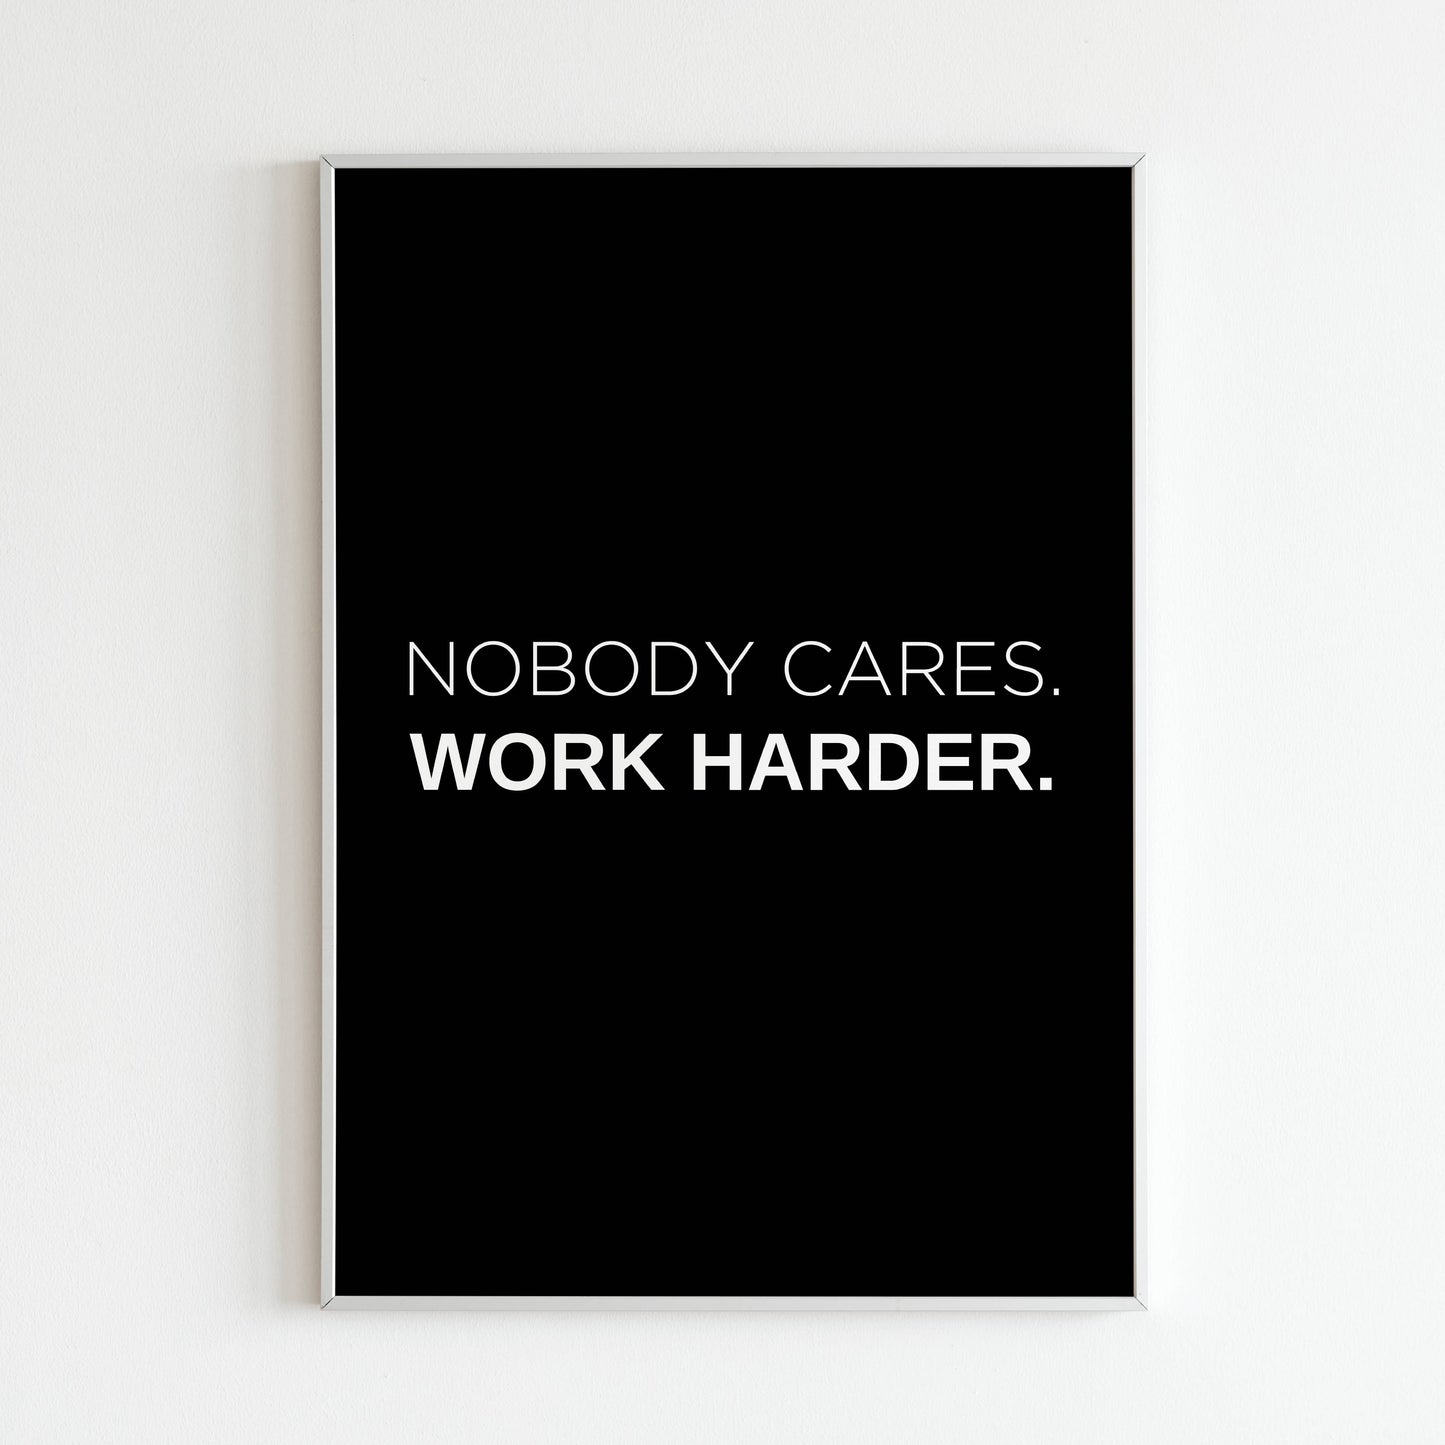 Downloadable "Nobody cares work harder" wall art for a hustle mentality.